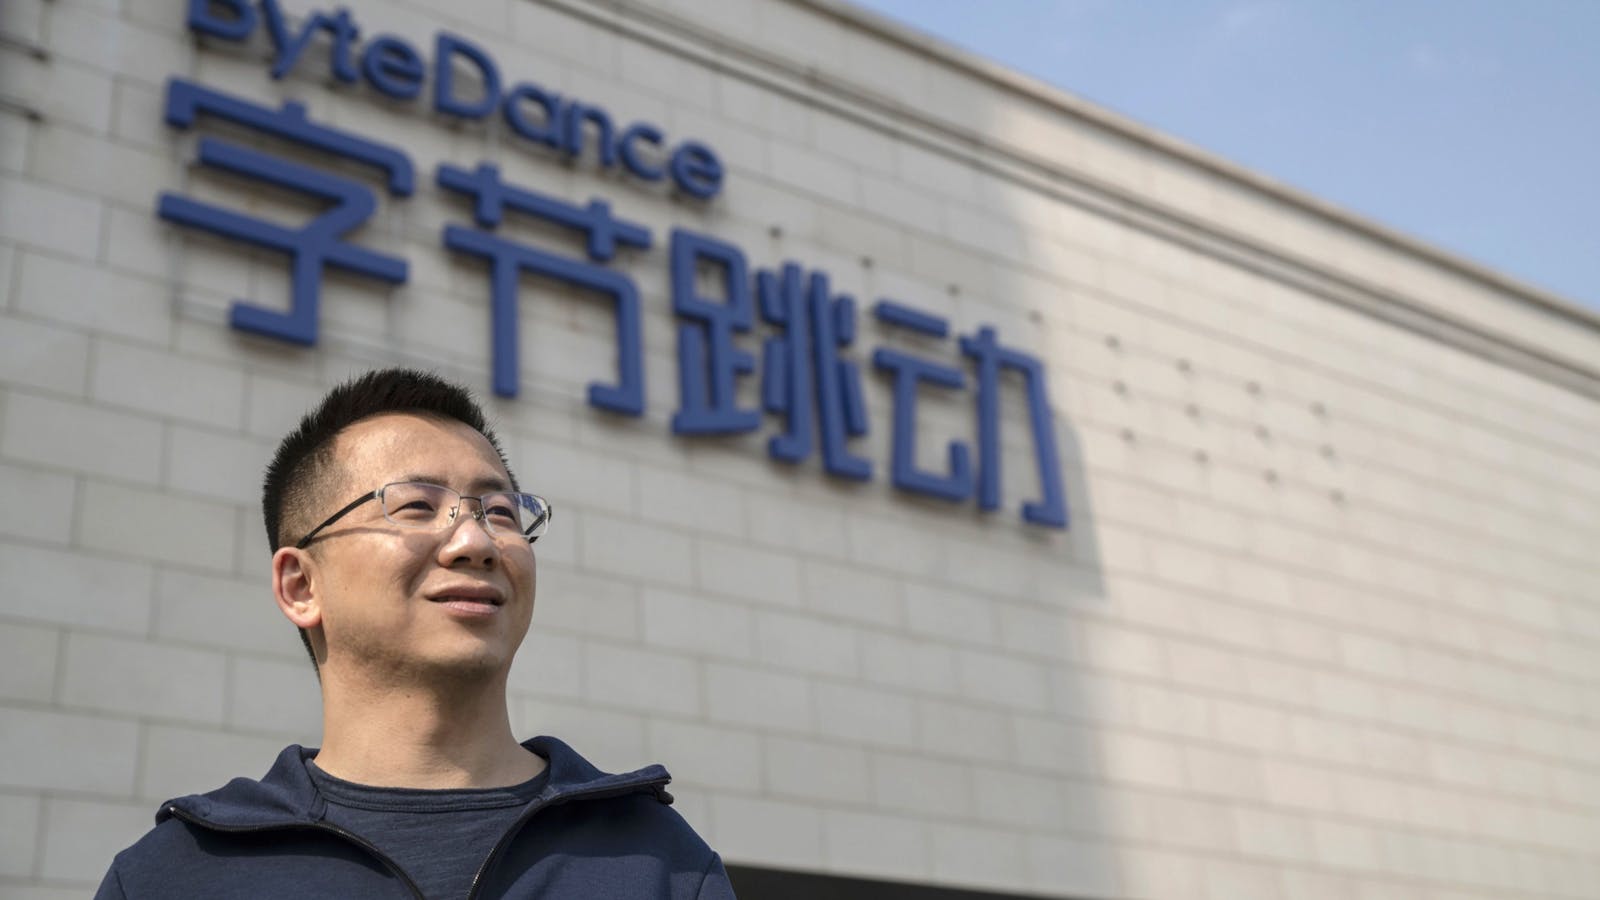 ByteDance founder Zhang Yiming. Photo by Bloomberg.